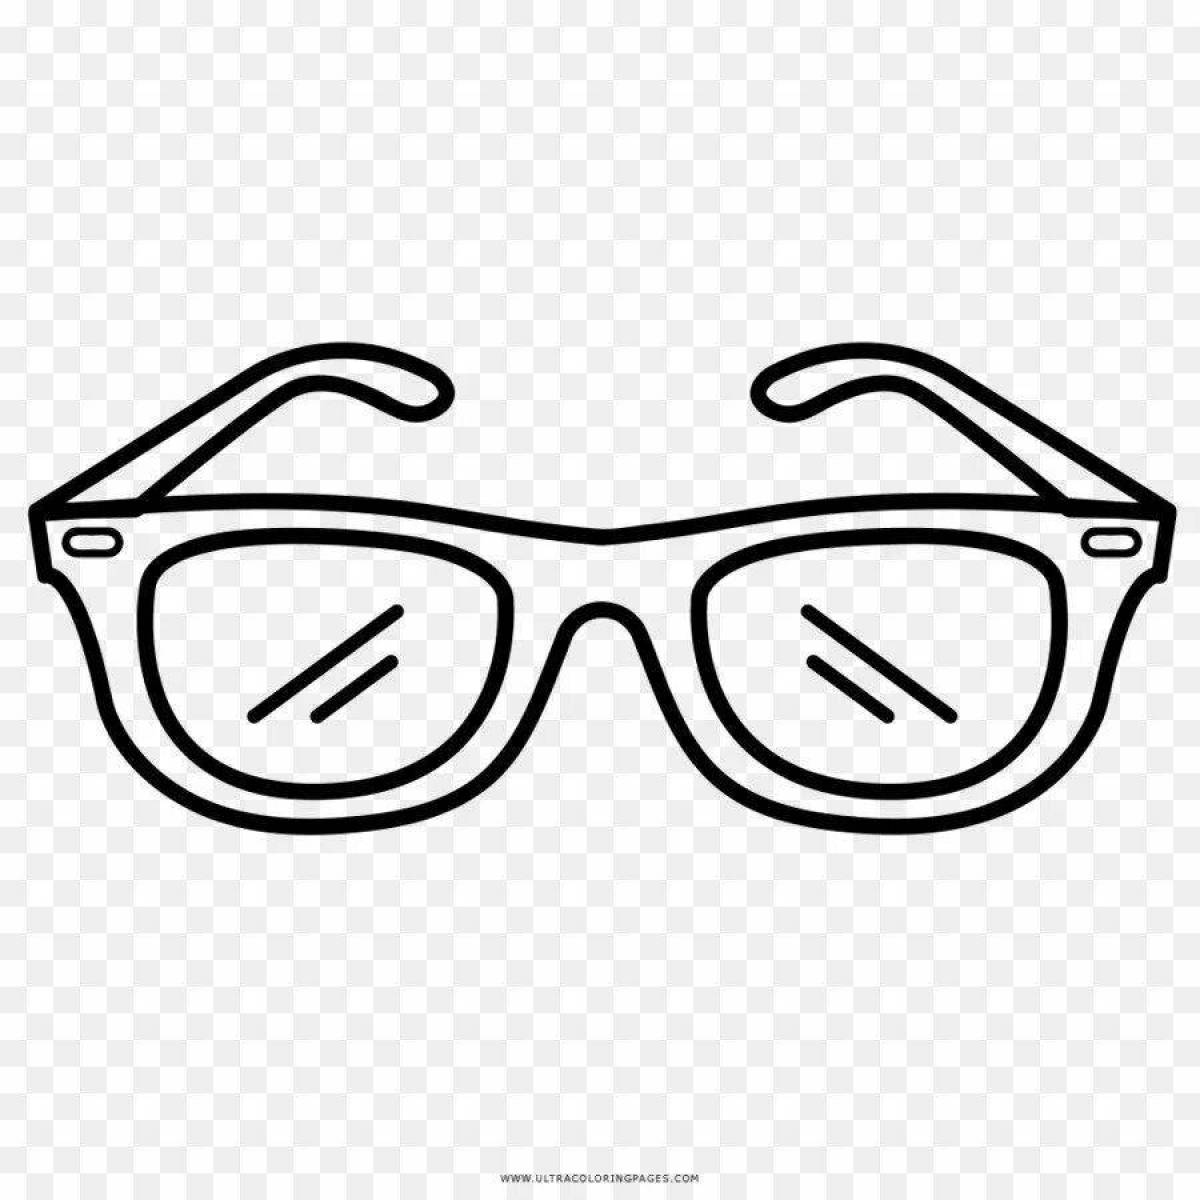 Fancy glasses coloring book for babies